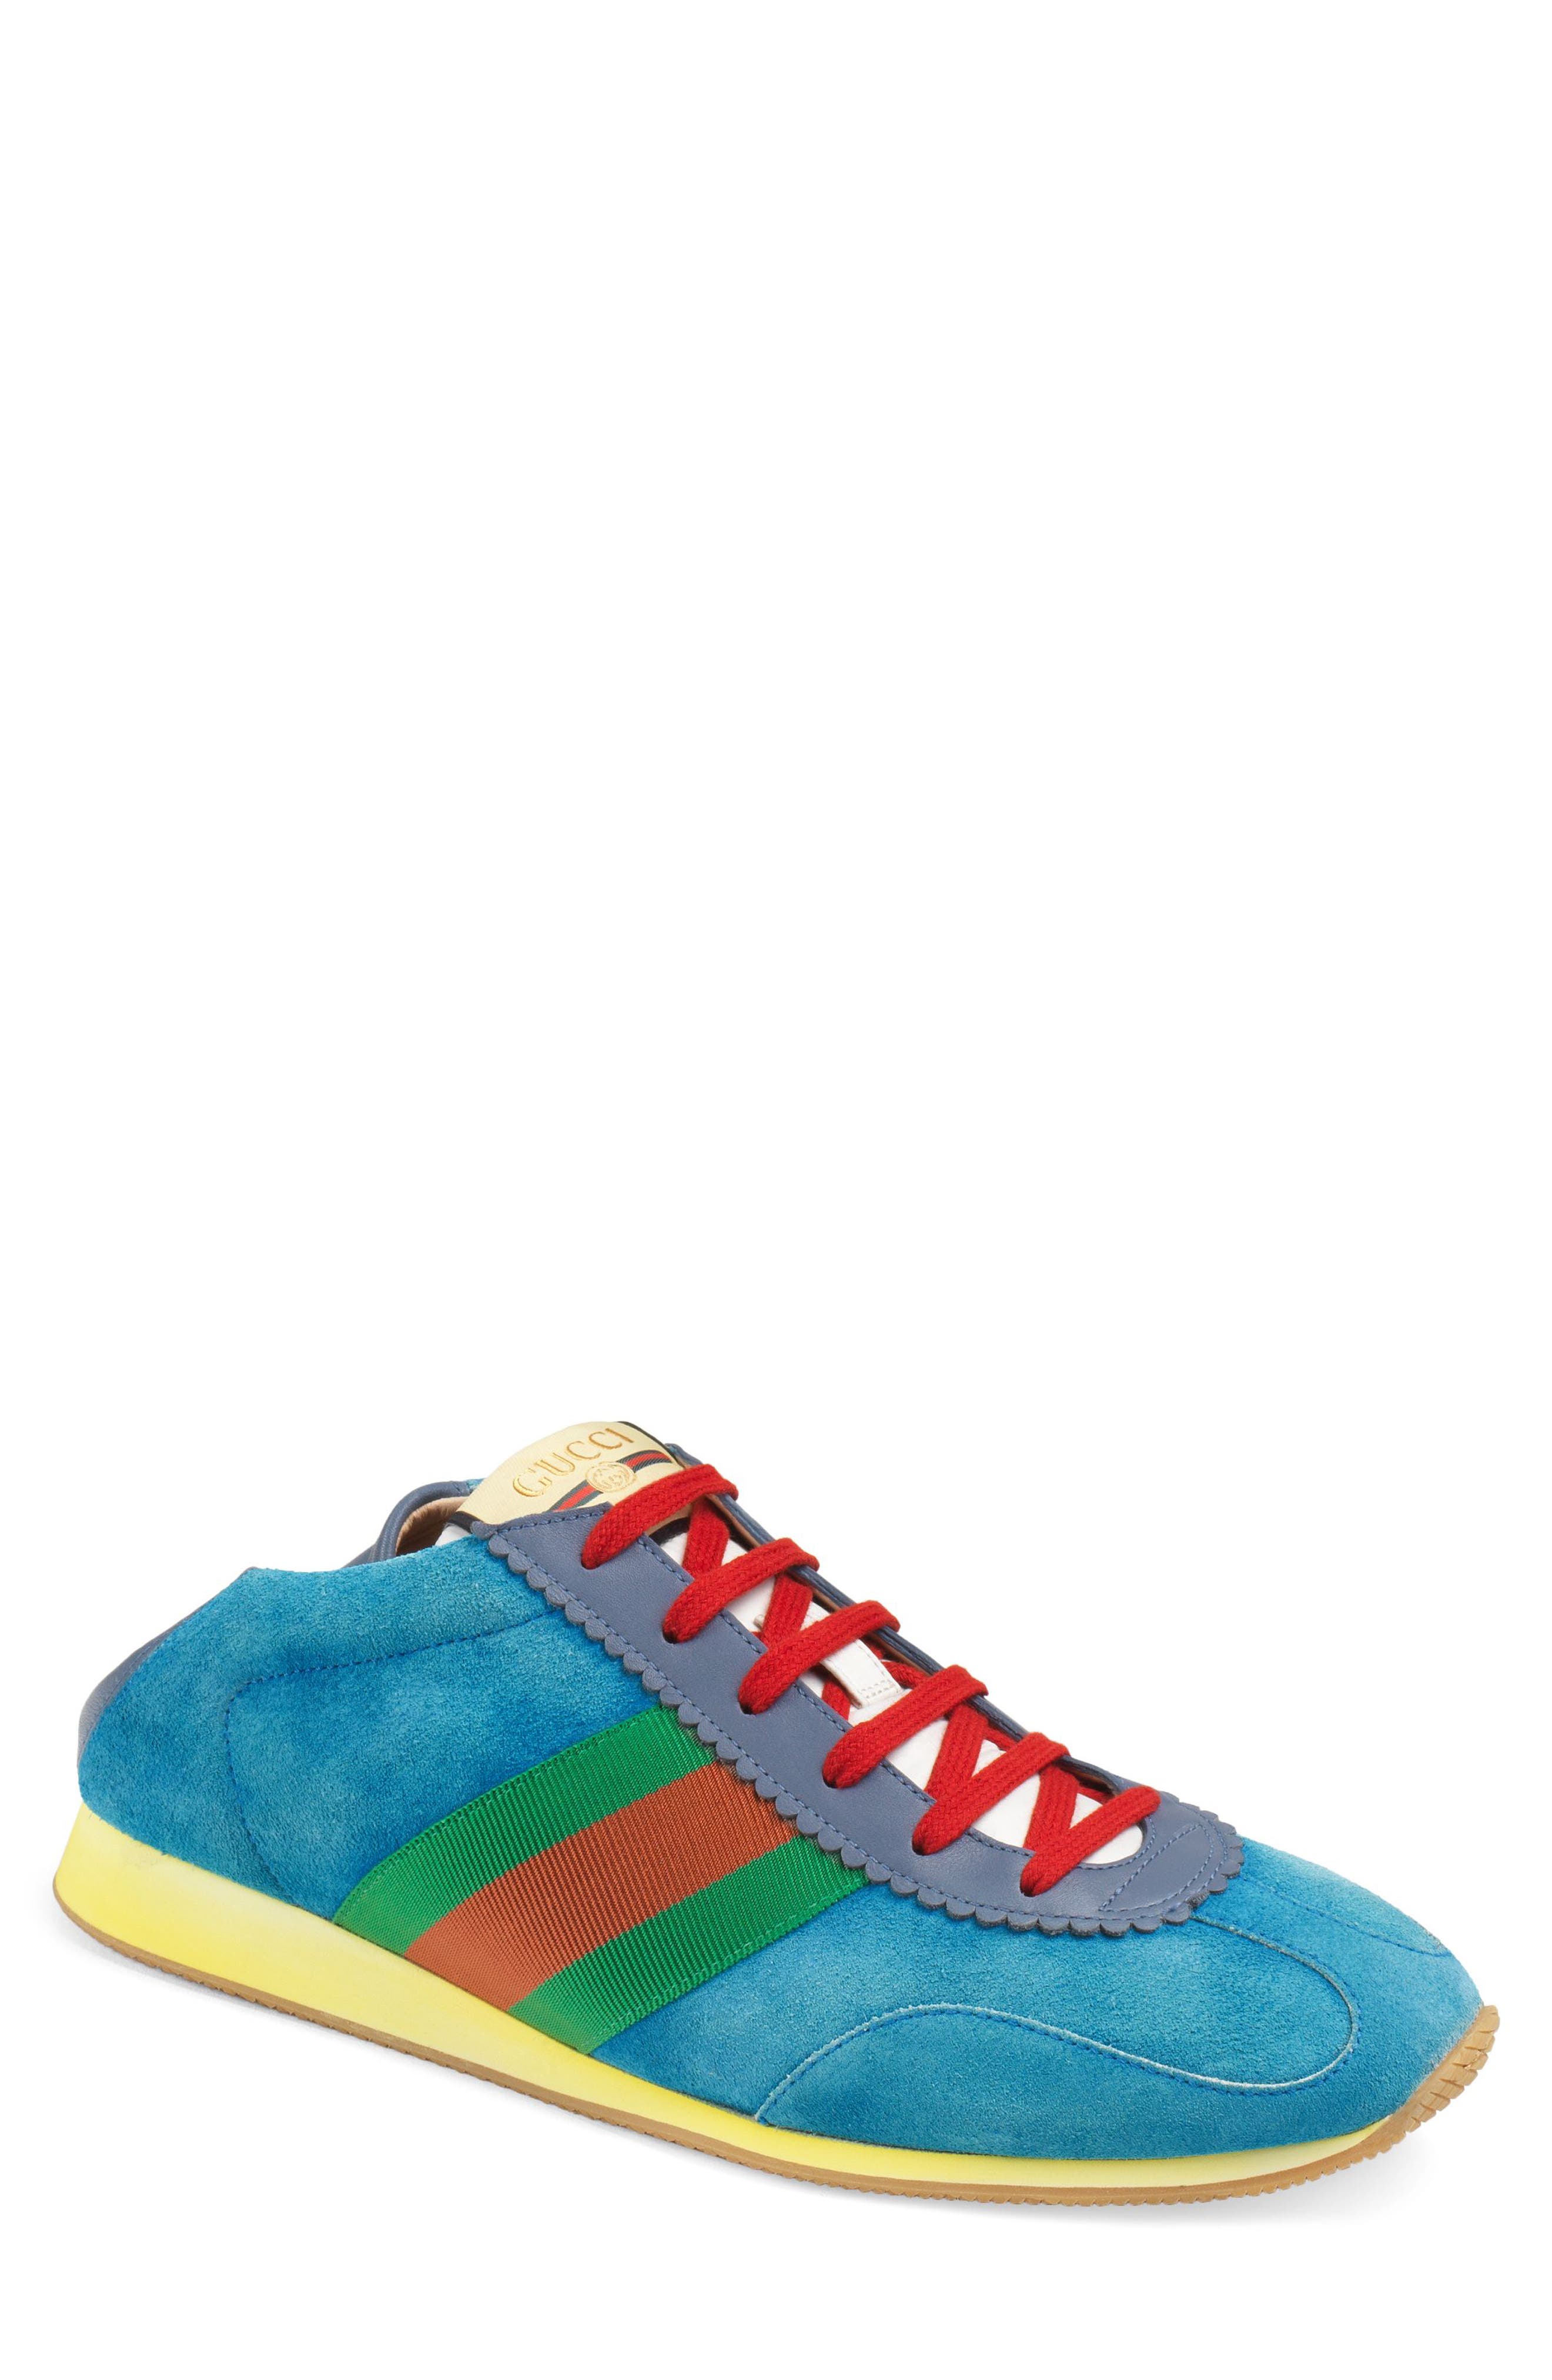 gucci collapsible heel sneaker